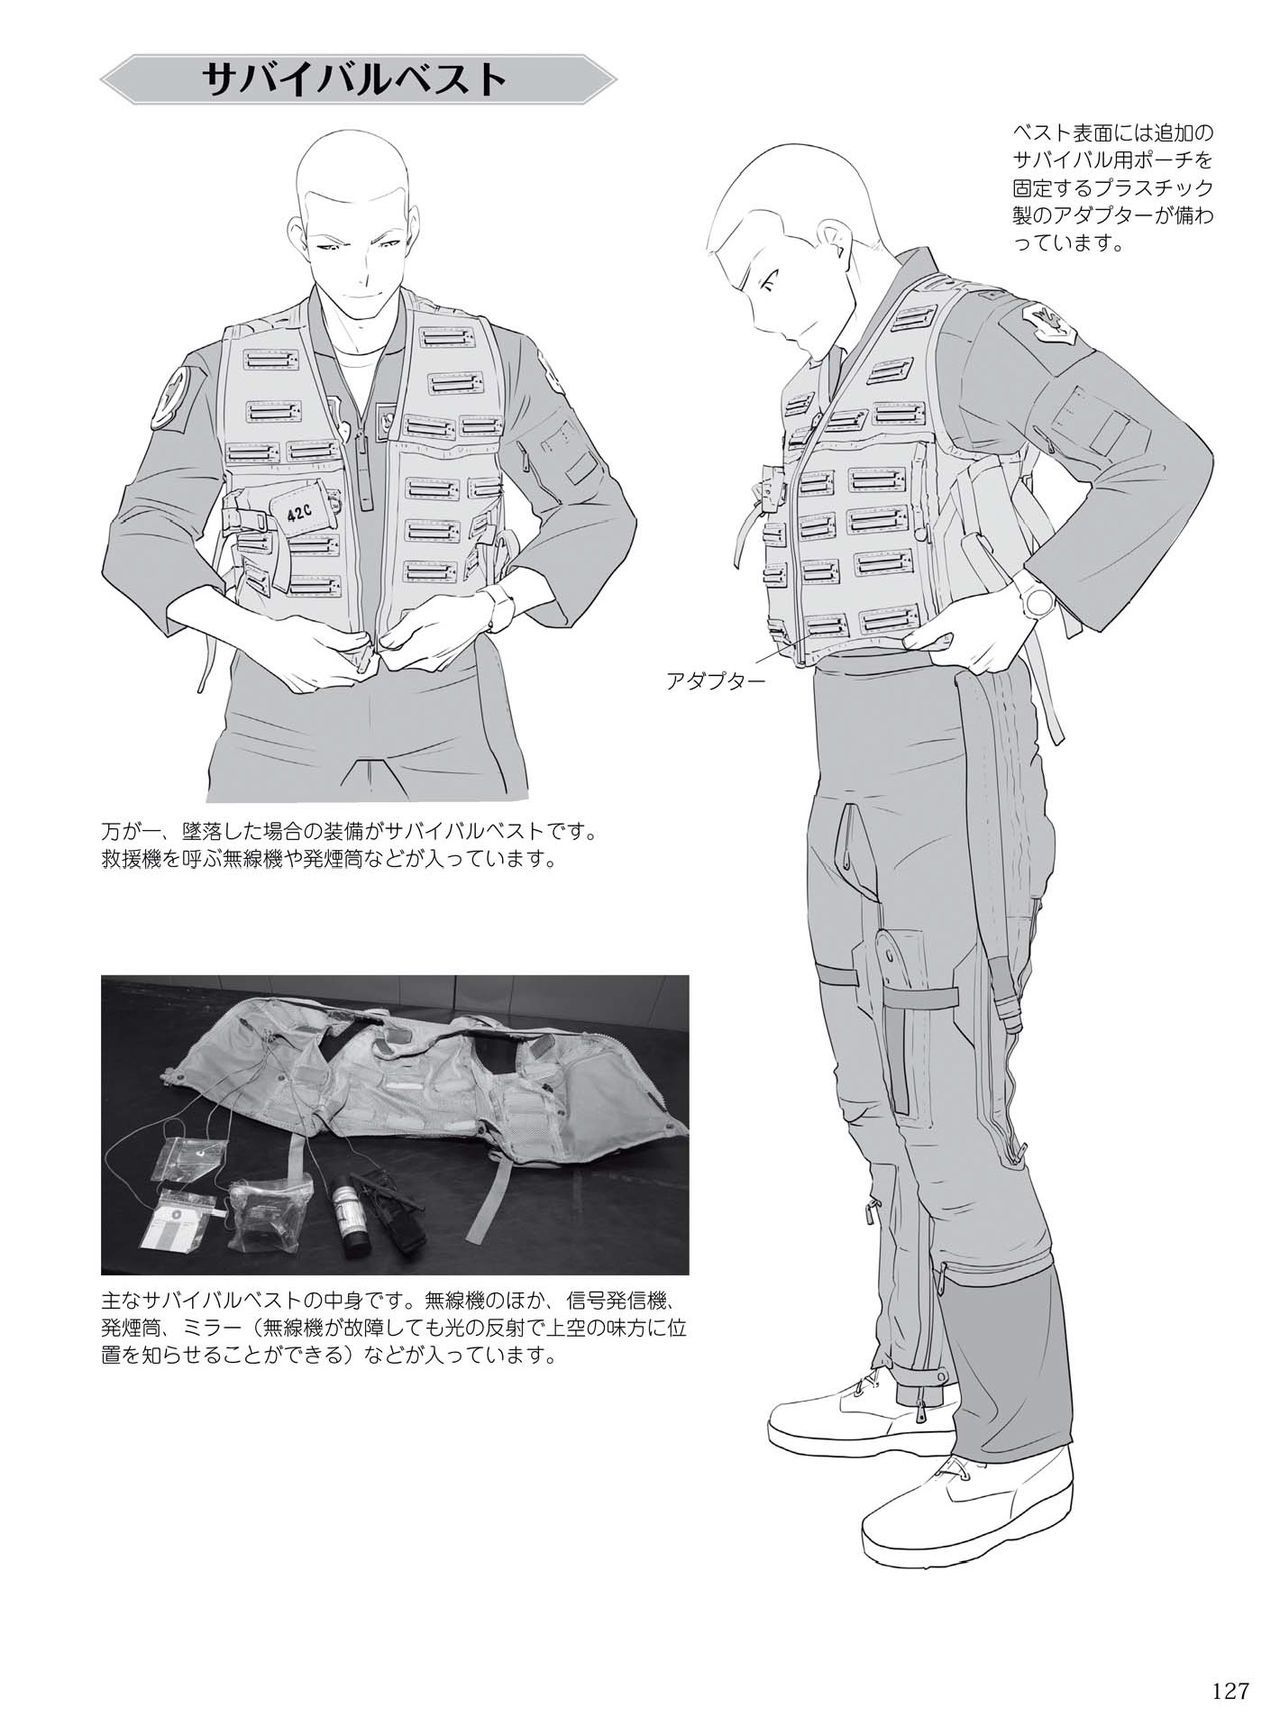 How to draw military uniforms and uniforms From Self-Defense Forces 軍服・制服の描き方 アメリカ軍・自衛隊の制服から戦闘服まで 130